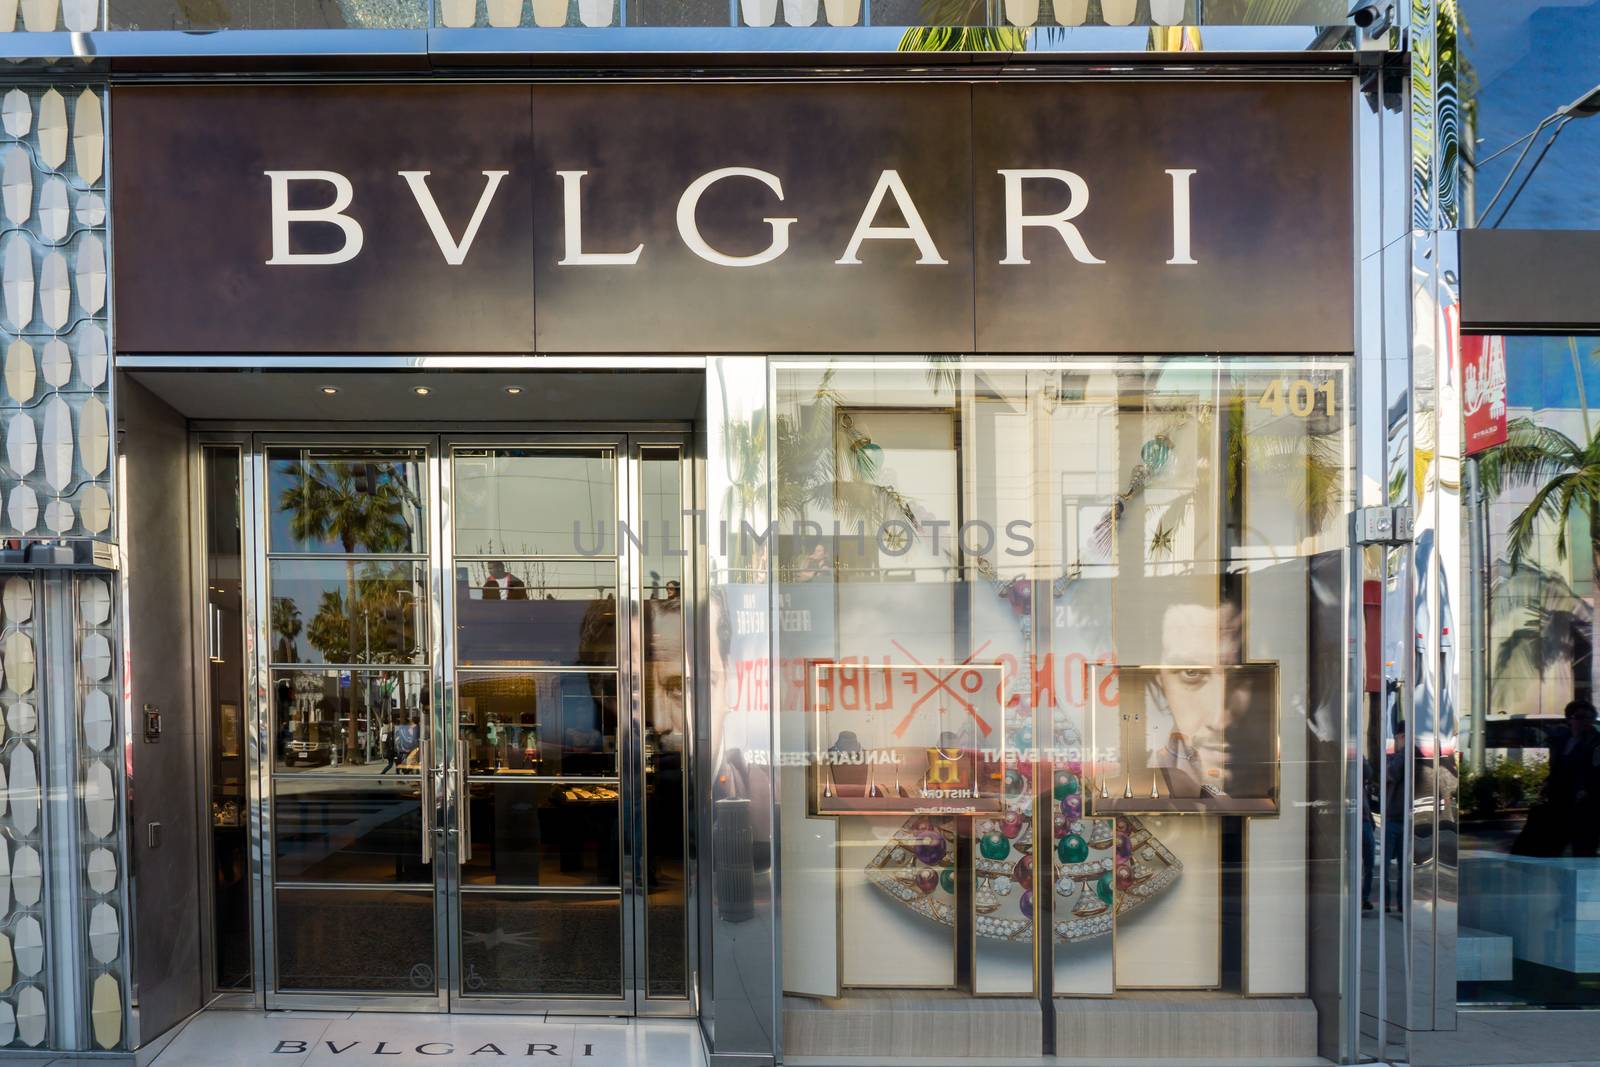 BEVERLY HILLS, CA/USA - JANUARY 3, 2015: Bulgari retail store exterior. Bulgari is an Italian jewelry and luxury goods brand that produces jewelry, watches, fragrances, accessories, and hotels.